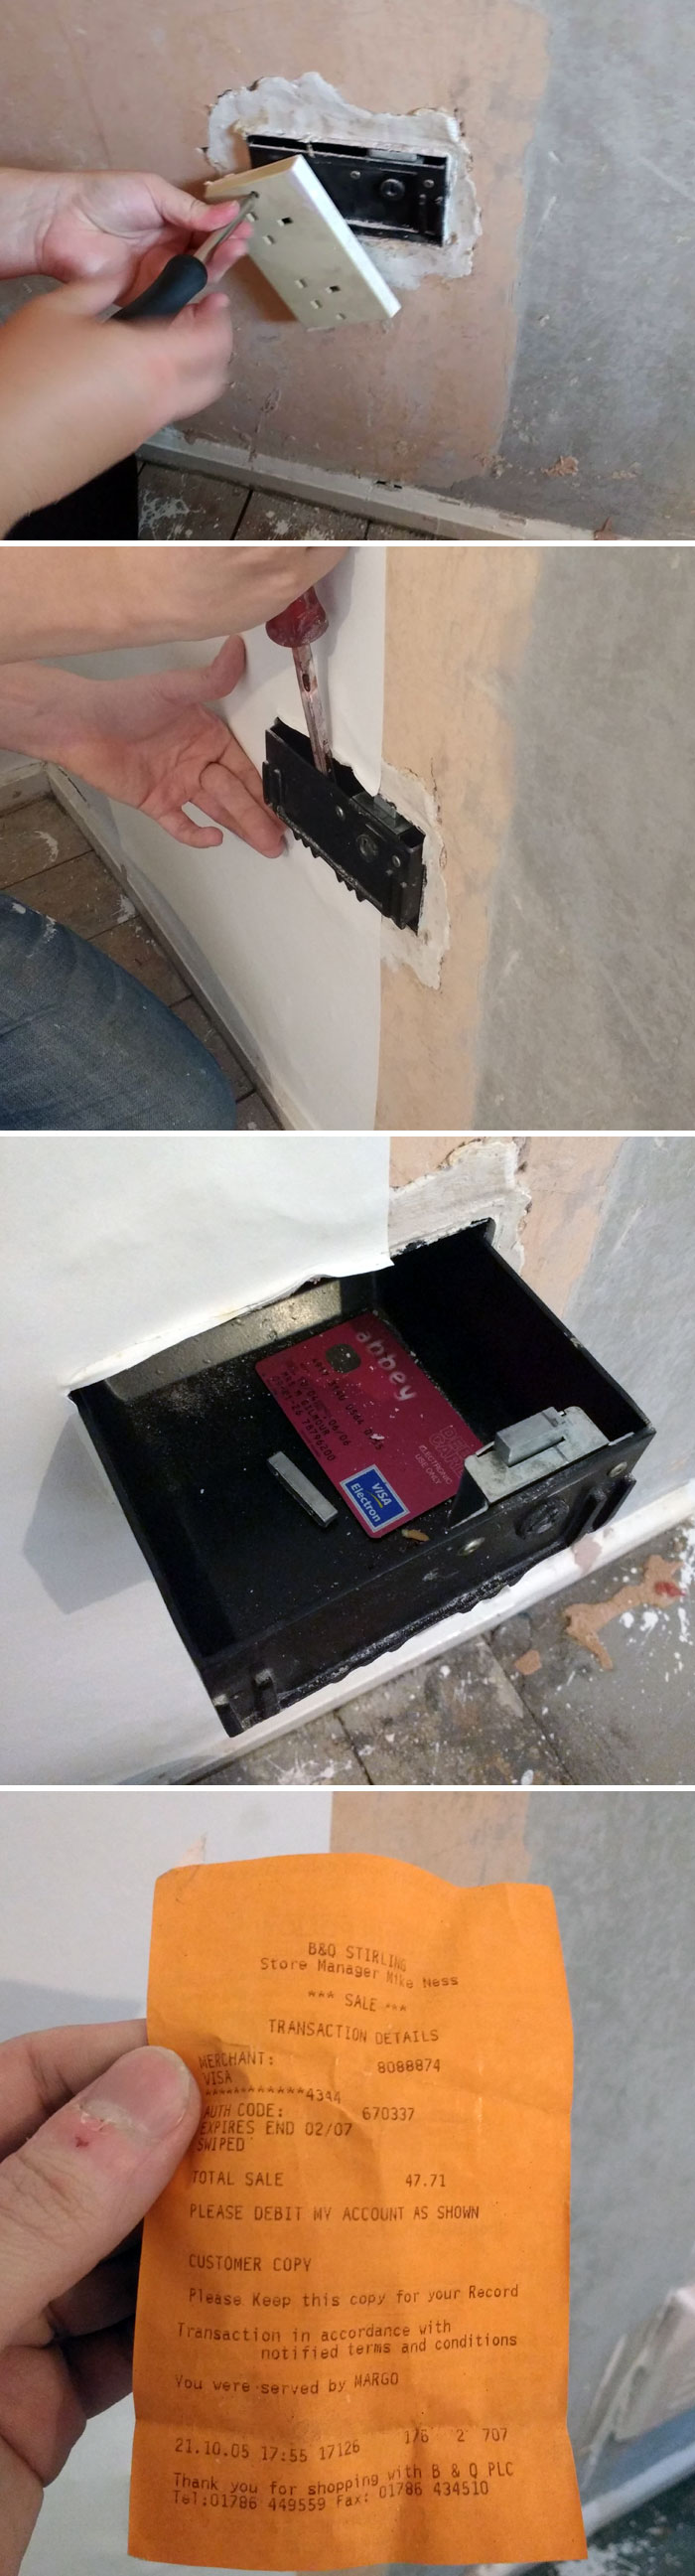 We Found A Safe Behind A Fake Electrical Socket In Our New House